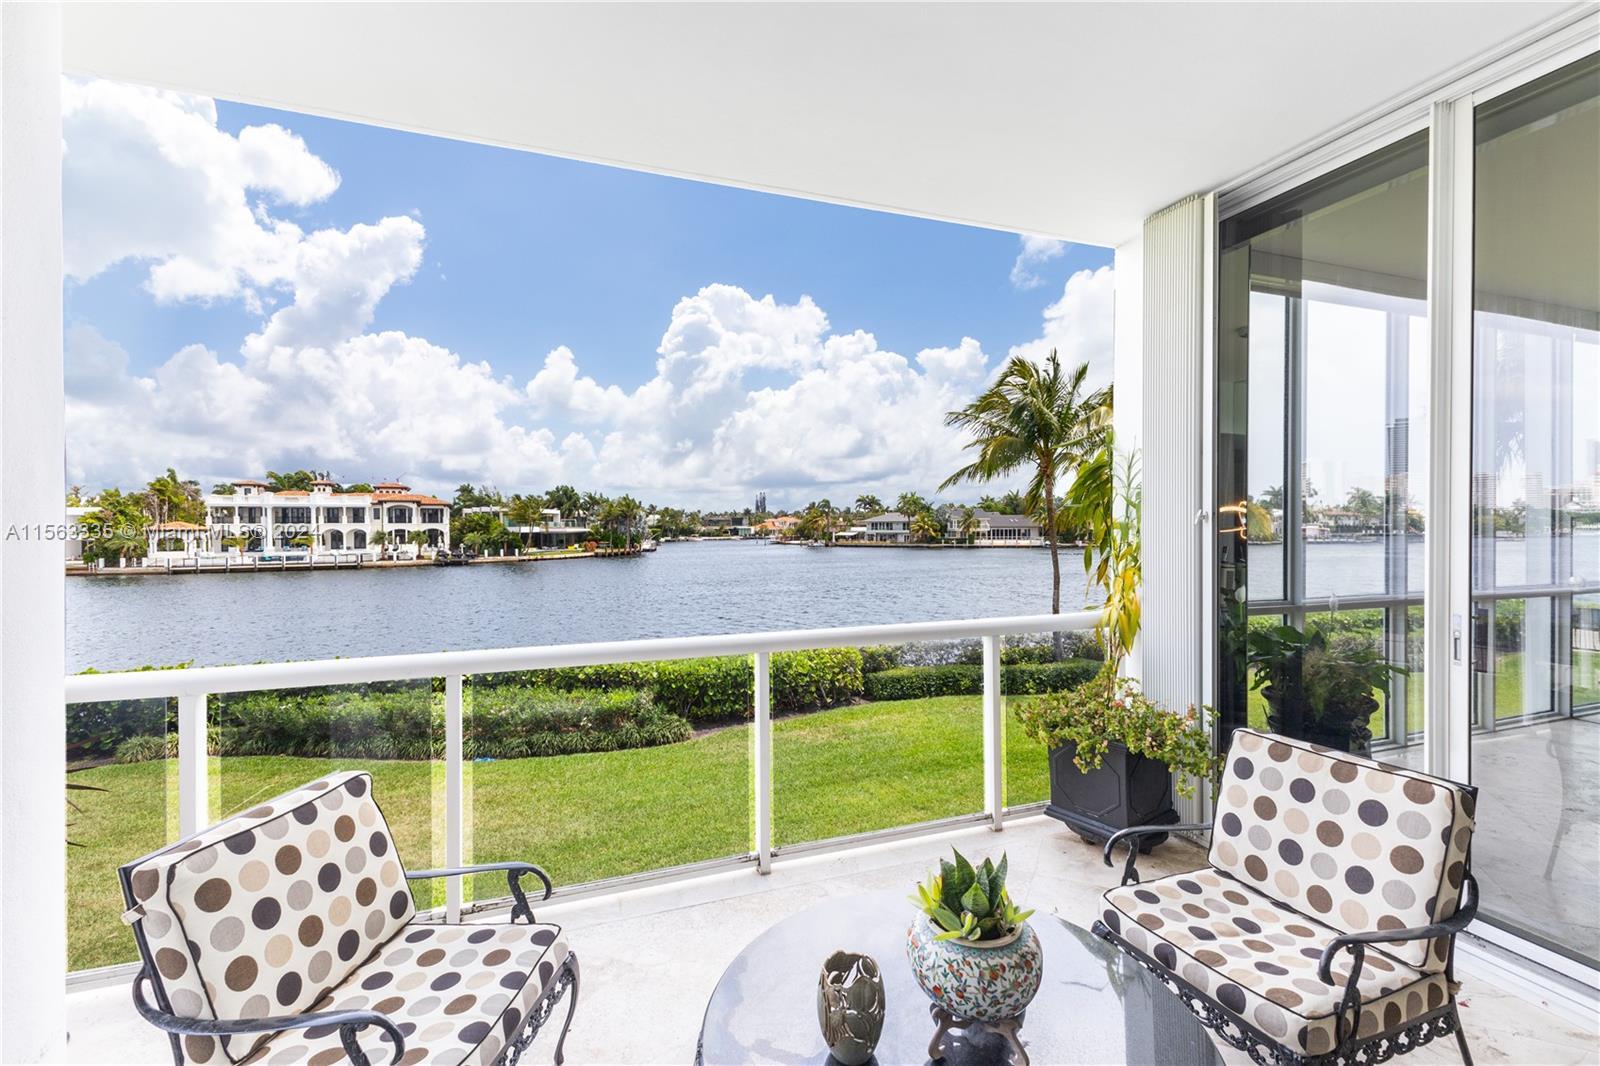 Welcome aboard this luxurious townhome on the water in One Island Place. Step into this expansive 3-